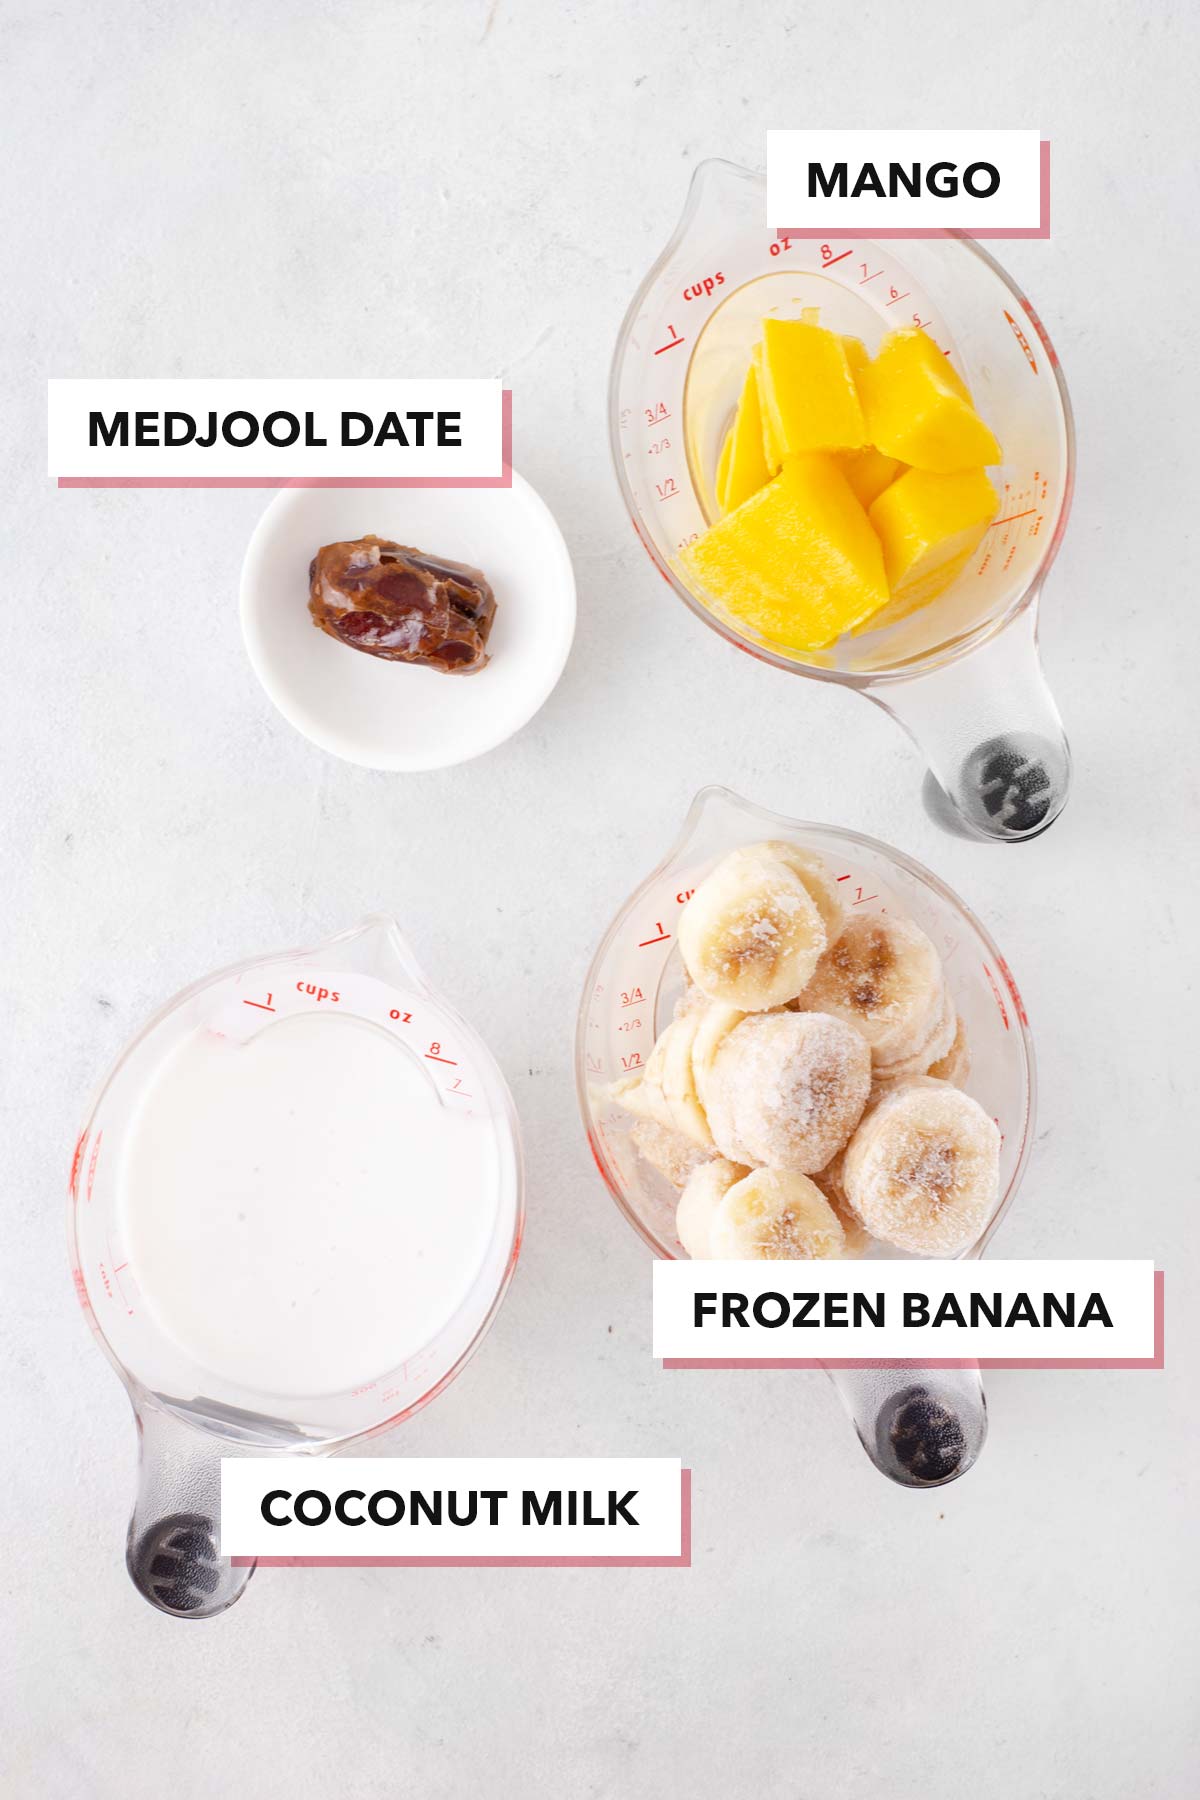 Ingredients for a coconut milk smoothie.